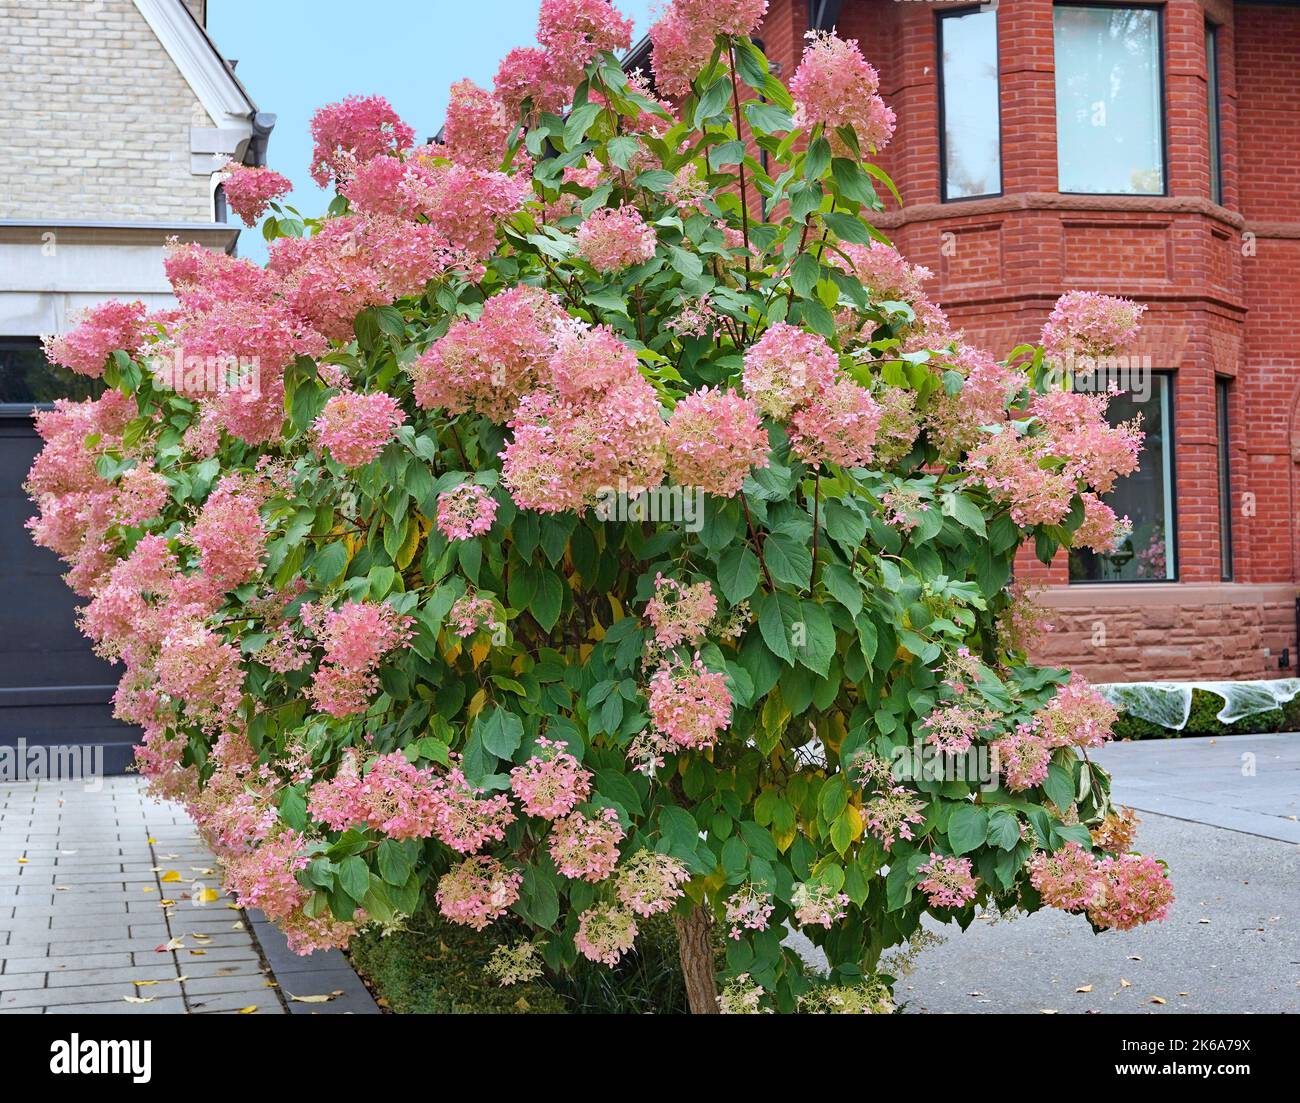 Hydrangea flowers that are white in the summer turn pink in the fall Stock Photo